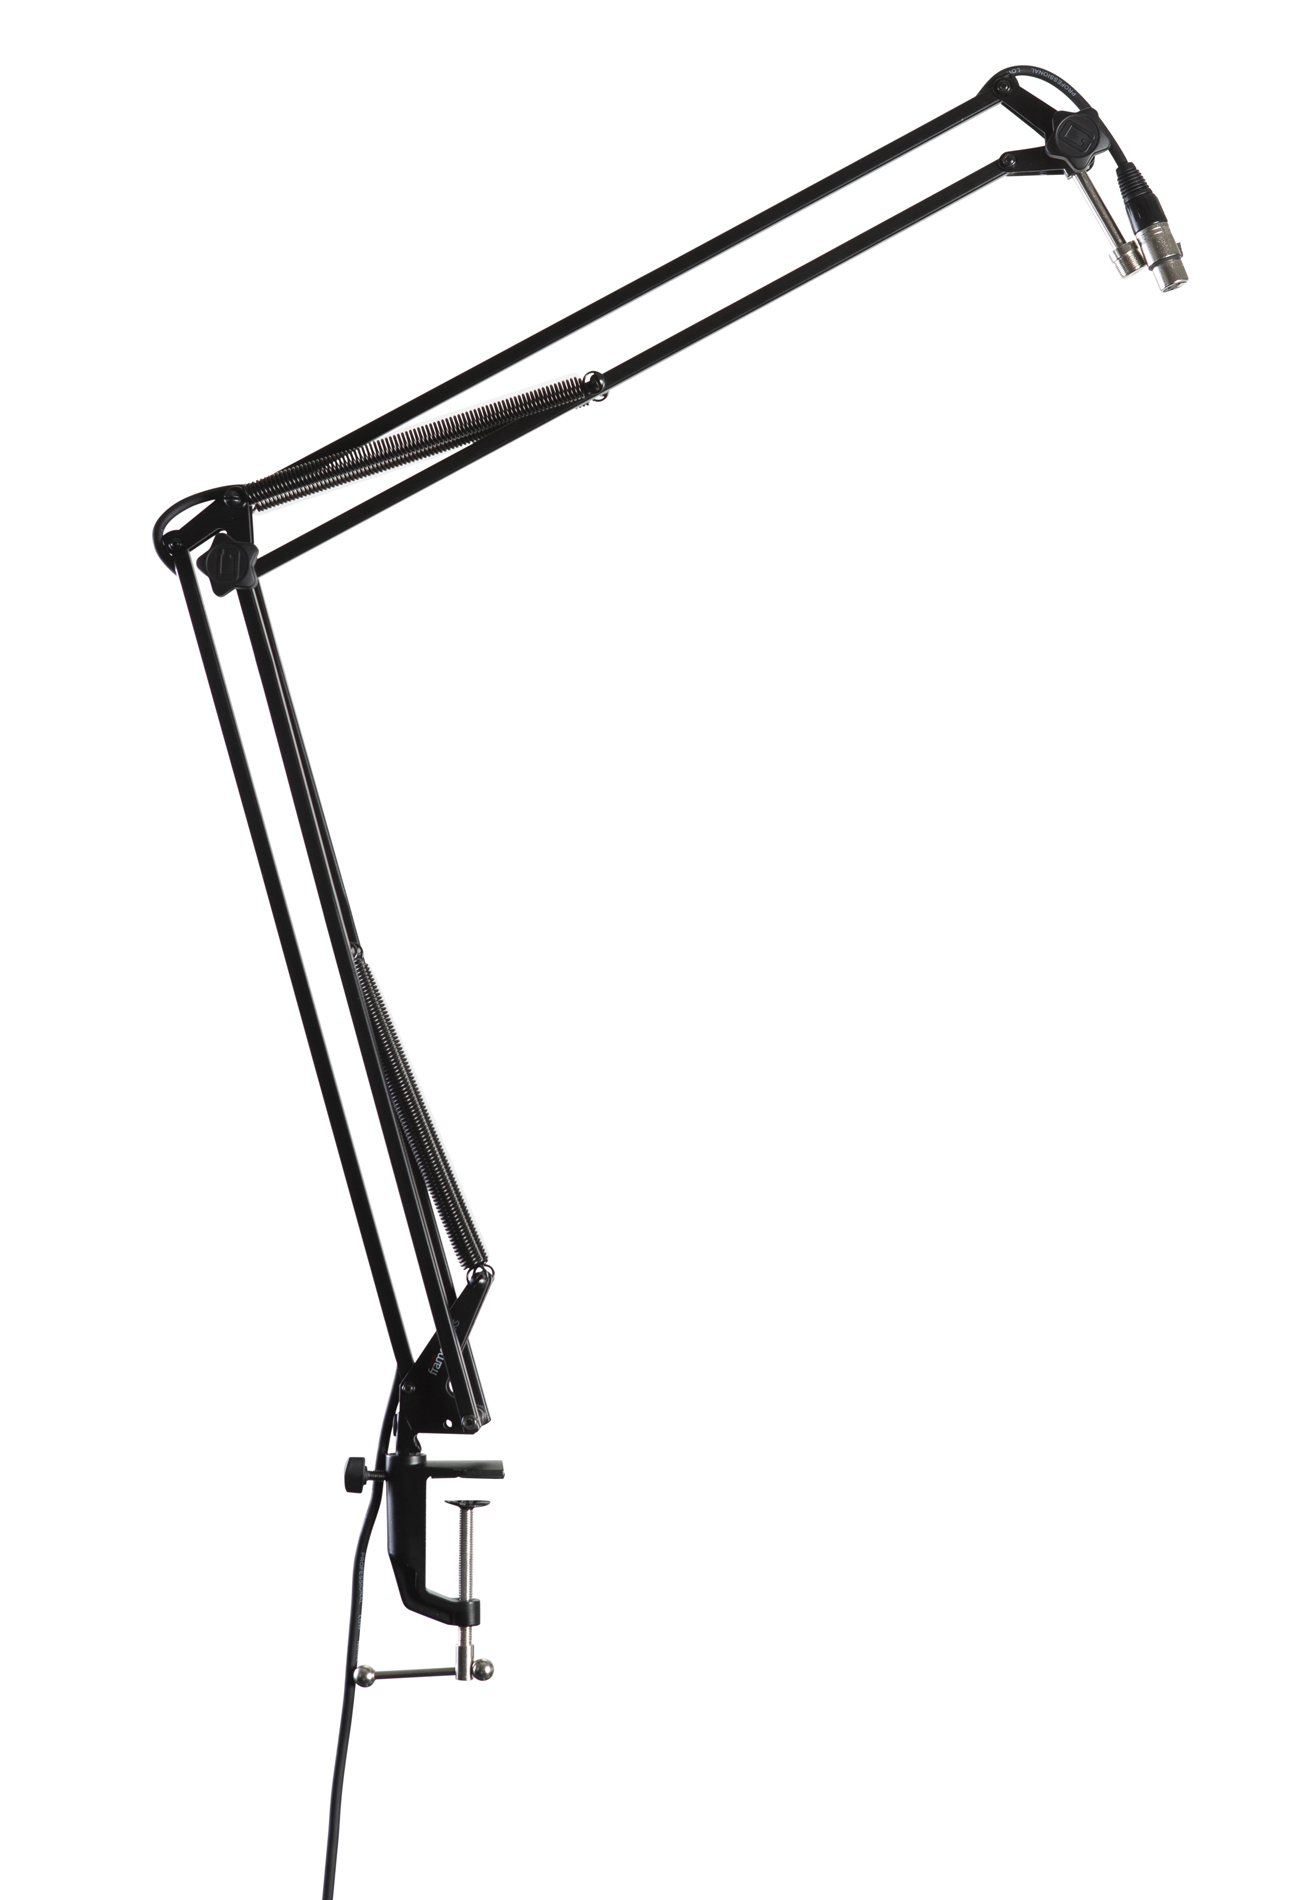 Bigsweety Microphone Desktop Base Frameworks Standard Desktop Microphone Stand with Fixed Height 